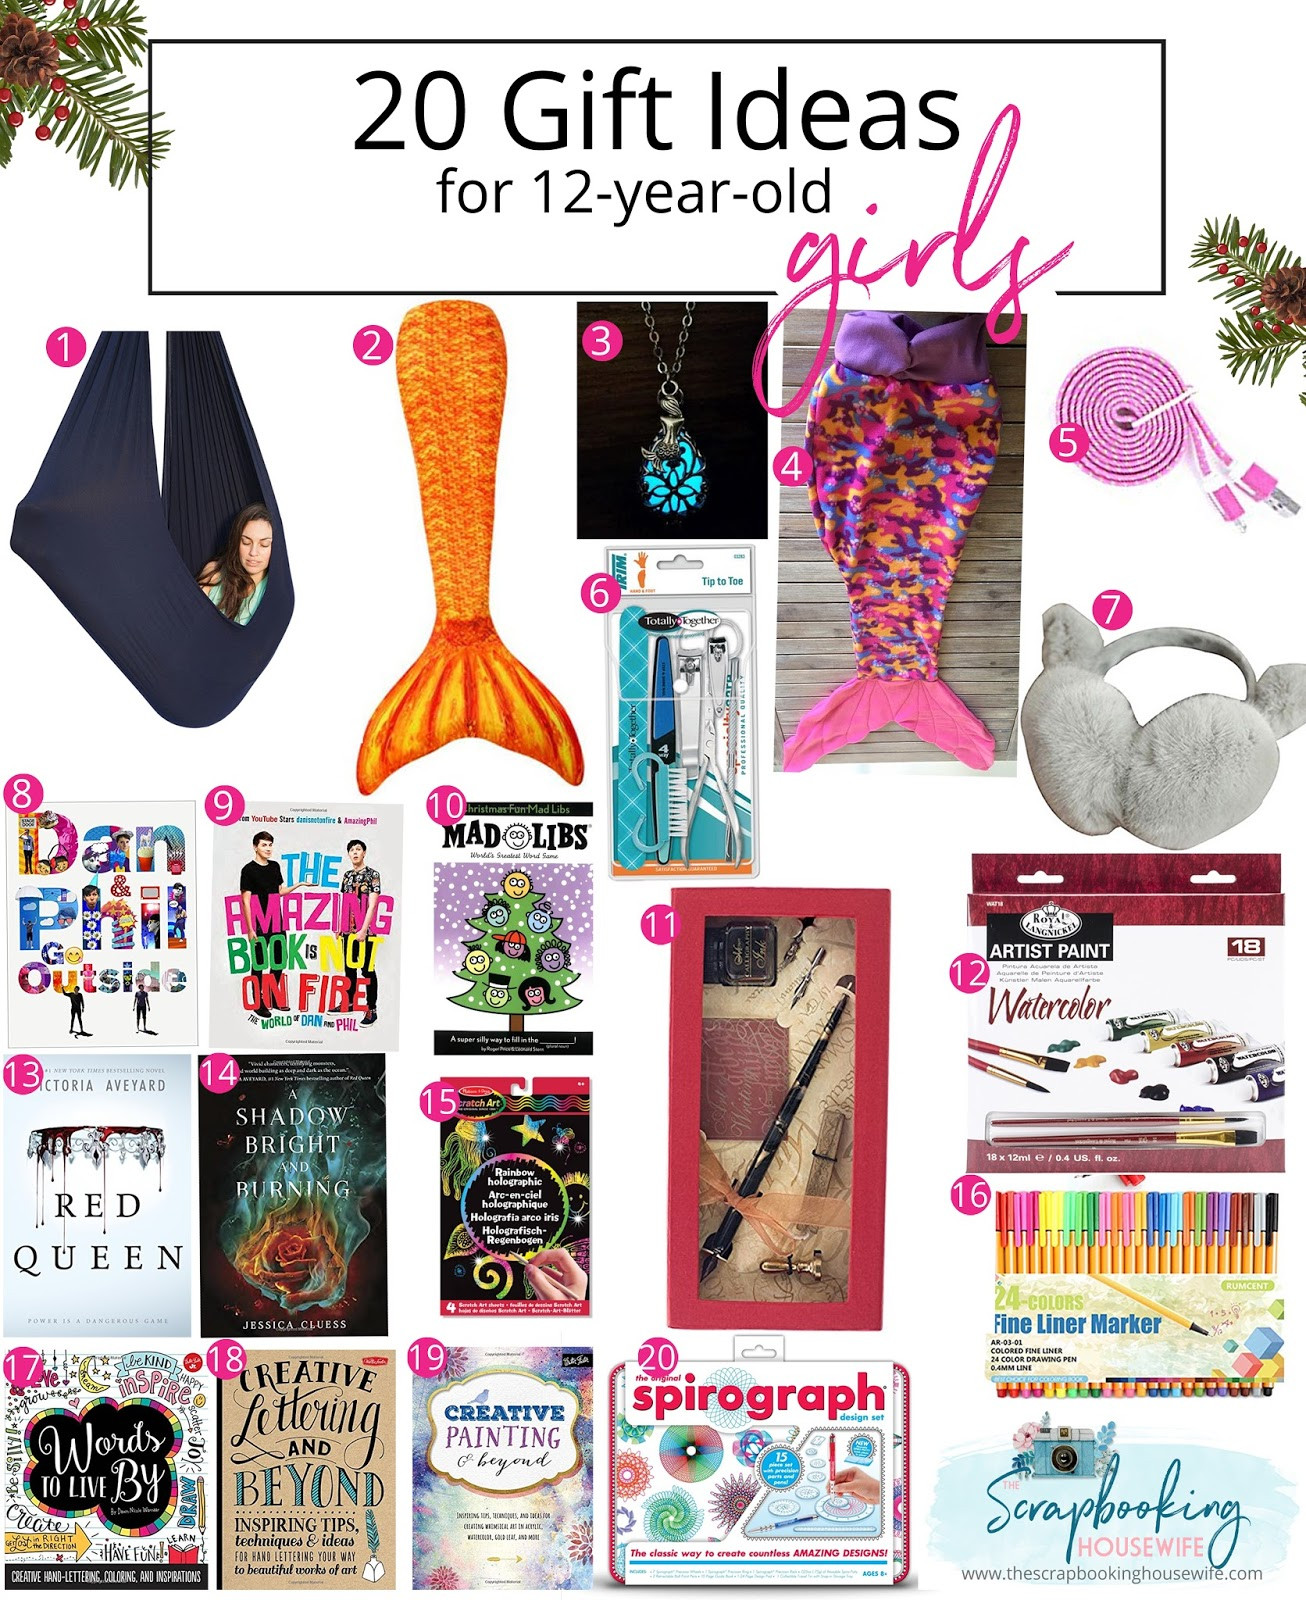 18 Year Old Birthday Gift Ideas Girl
 Ellabella Designs 13 GIFT IDEAS FOR TODDLERS